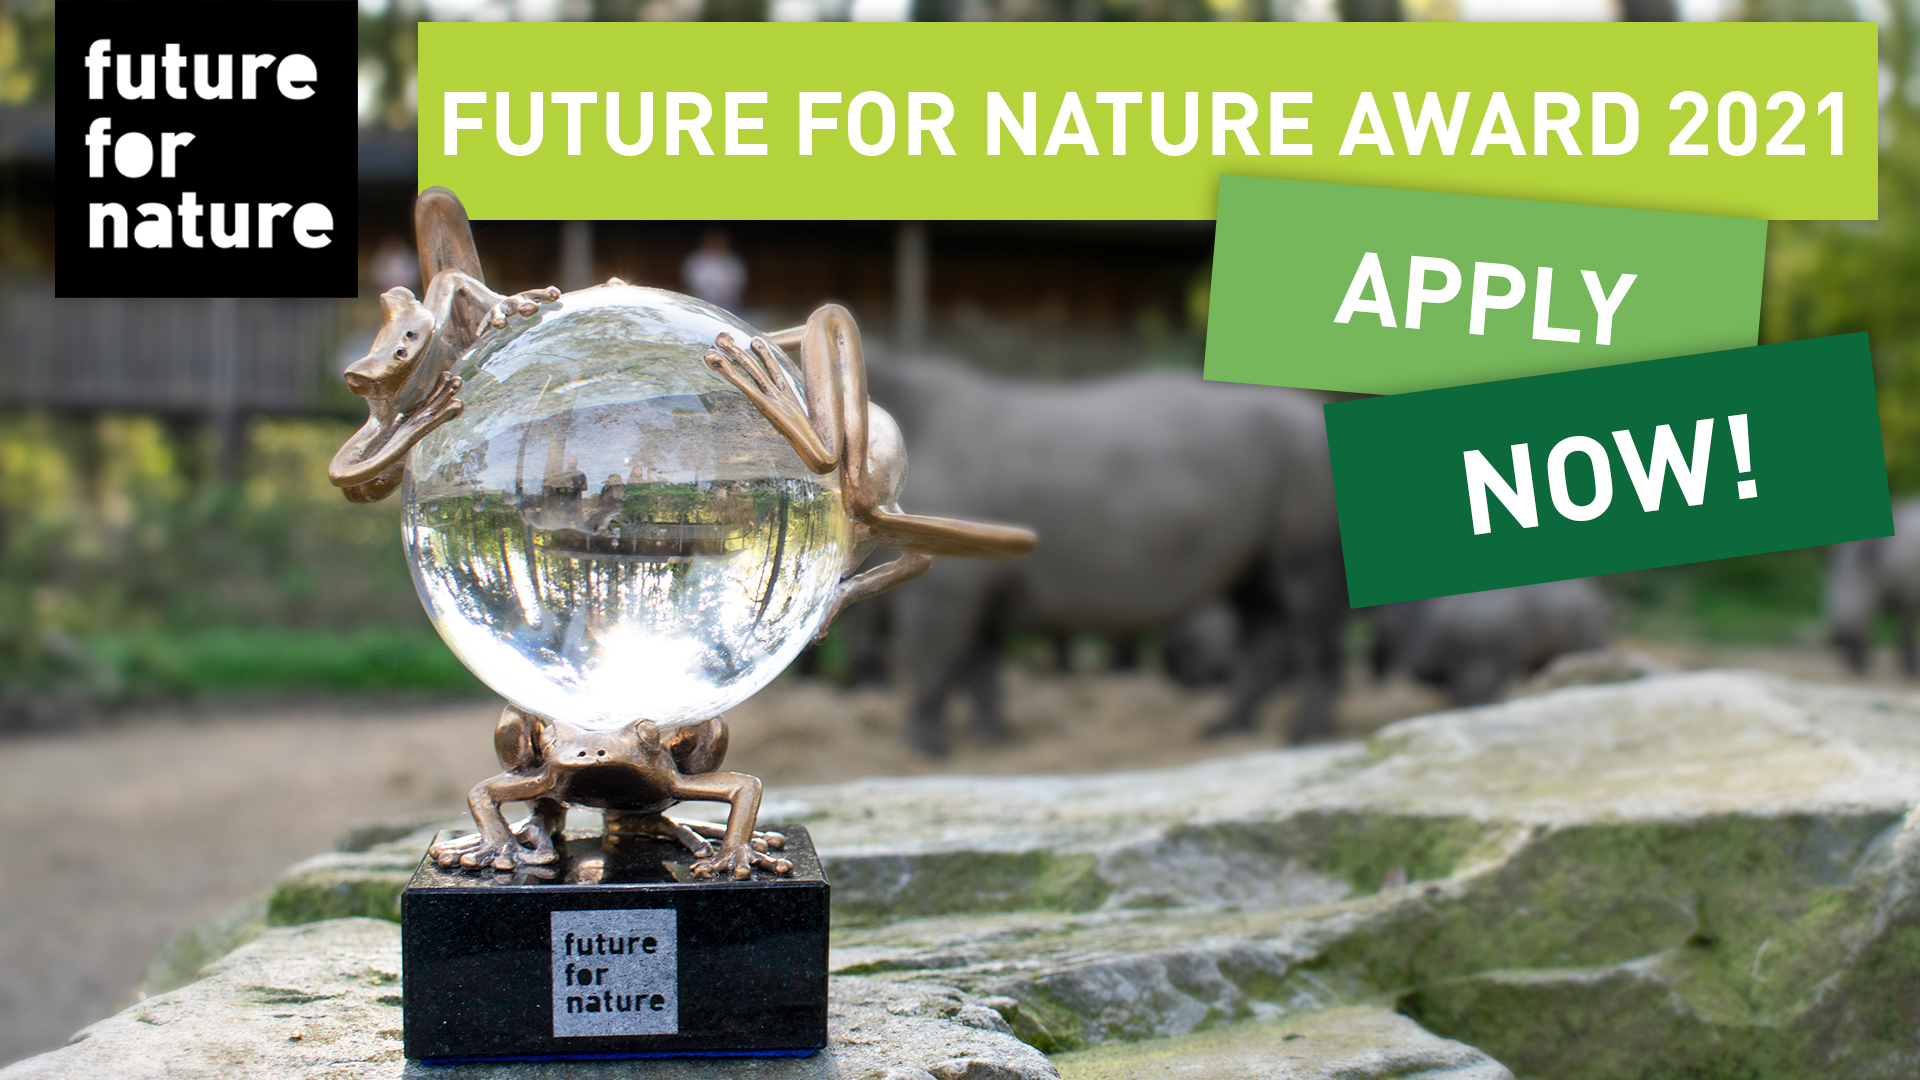 The application for the Future For Nature Awards 2021 is now open – Amphibian Survival Alliance